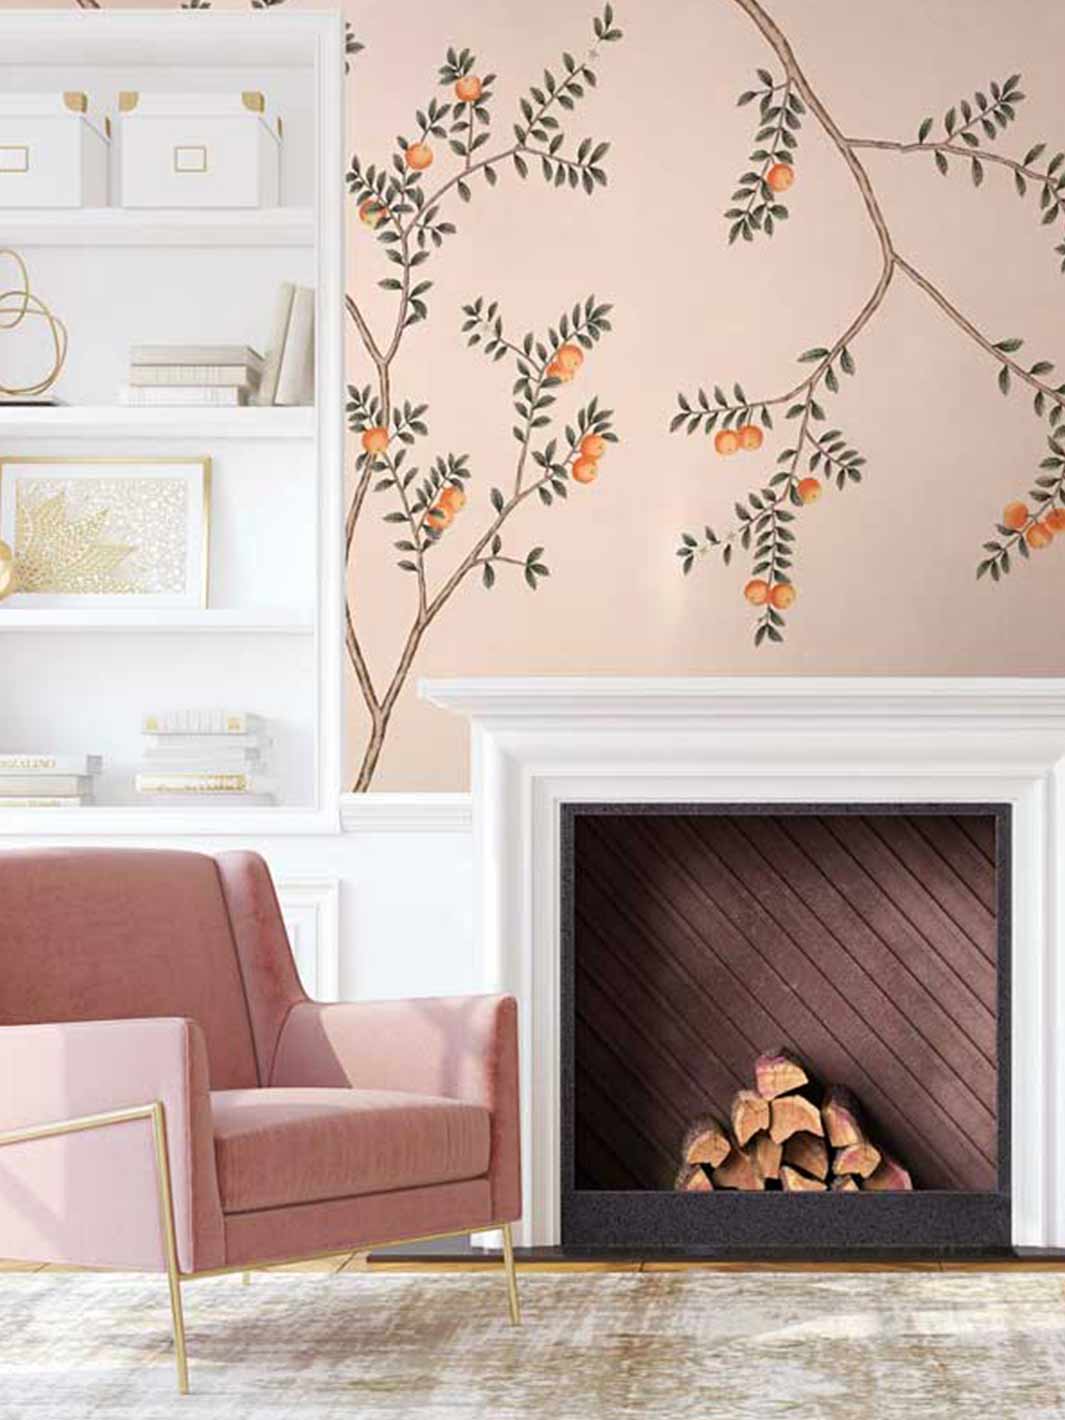 Aqualille Honeybell orange wallpaper by a fireplace